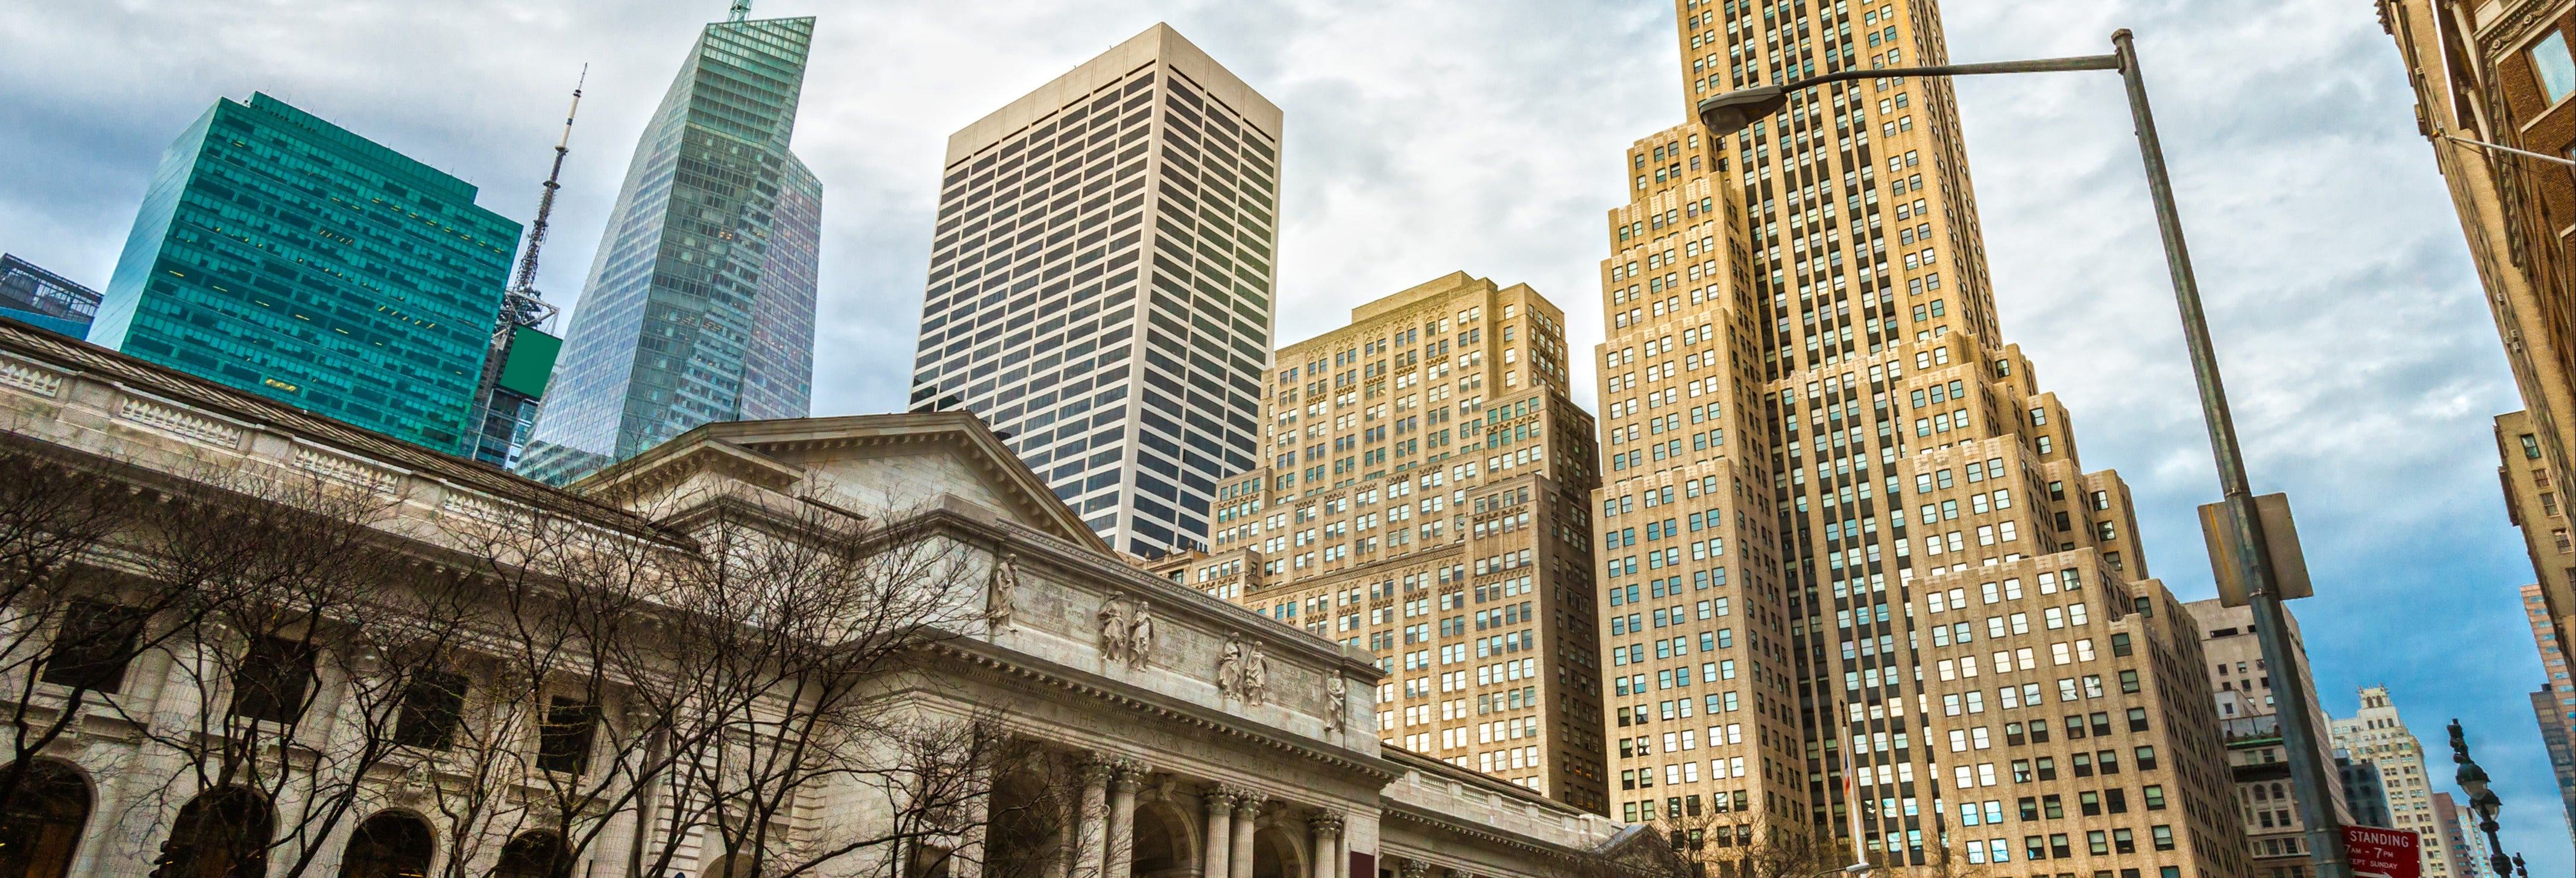 history walking tours in nyc